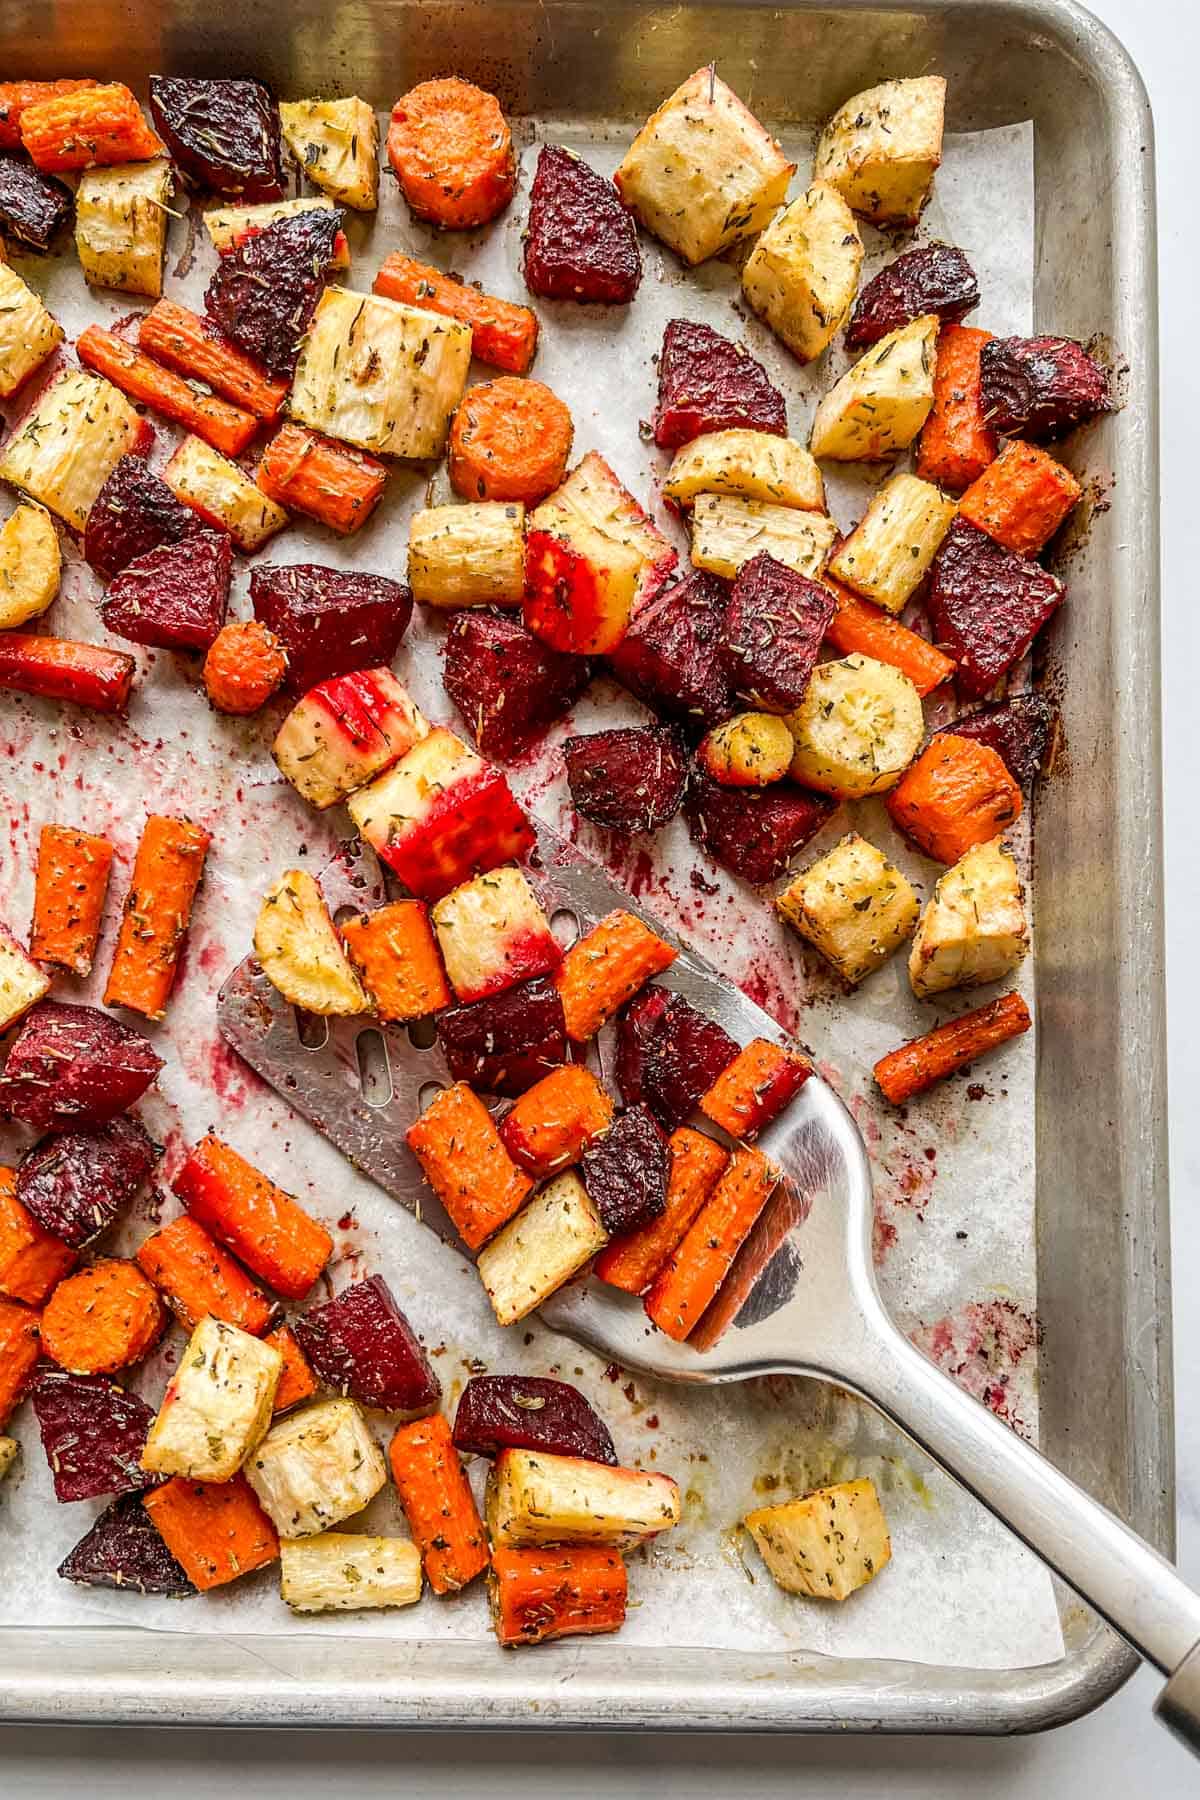 Roasted root vegetables on a parchment lined baking sheet.